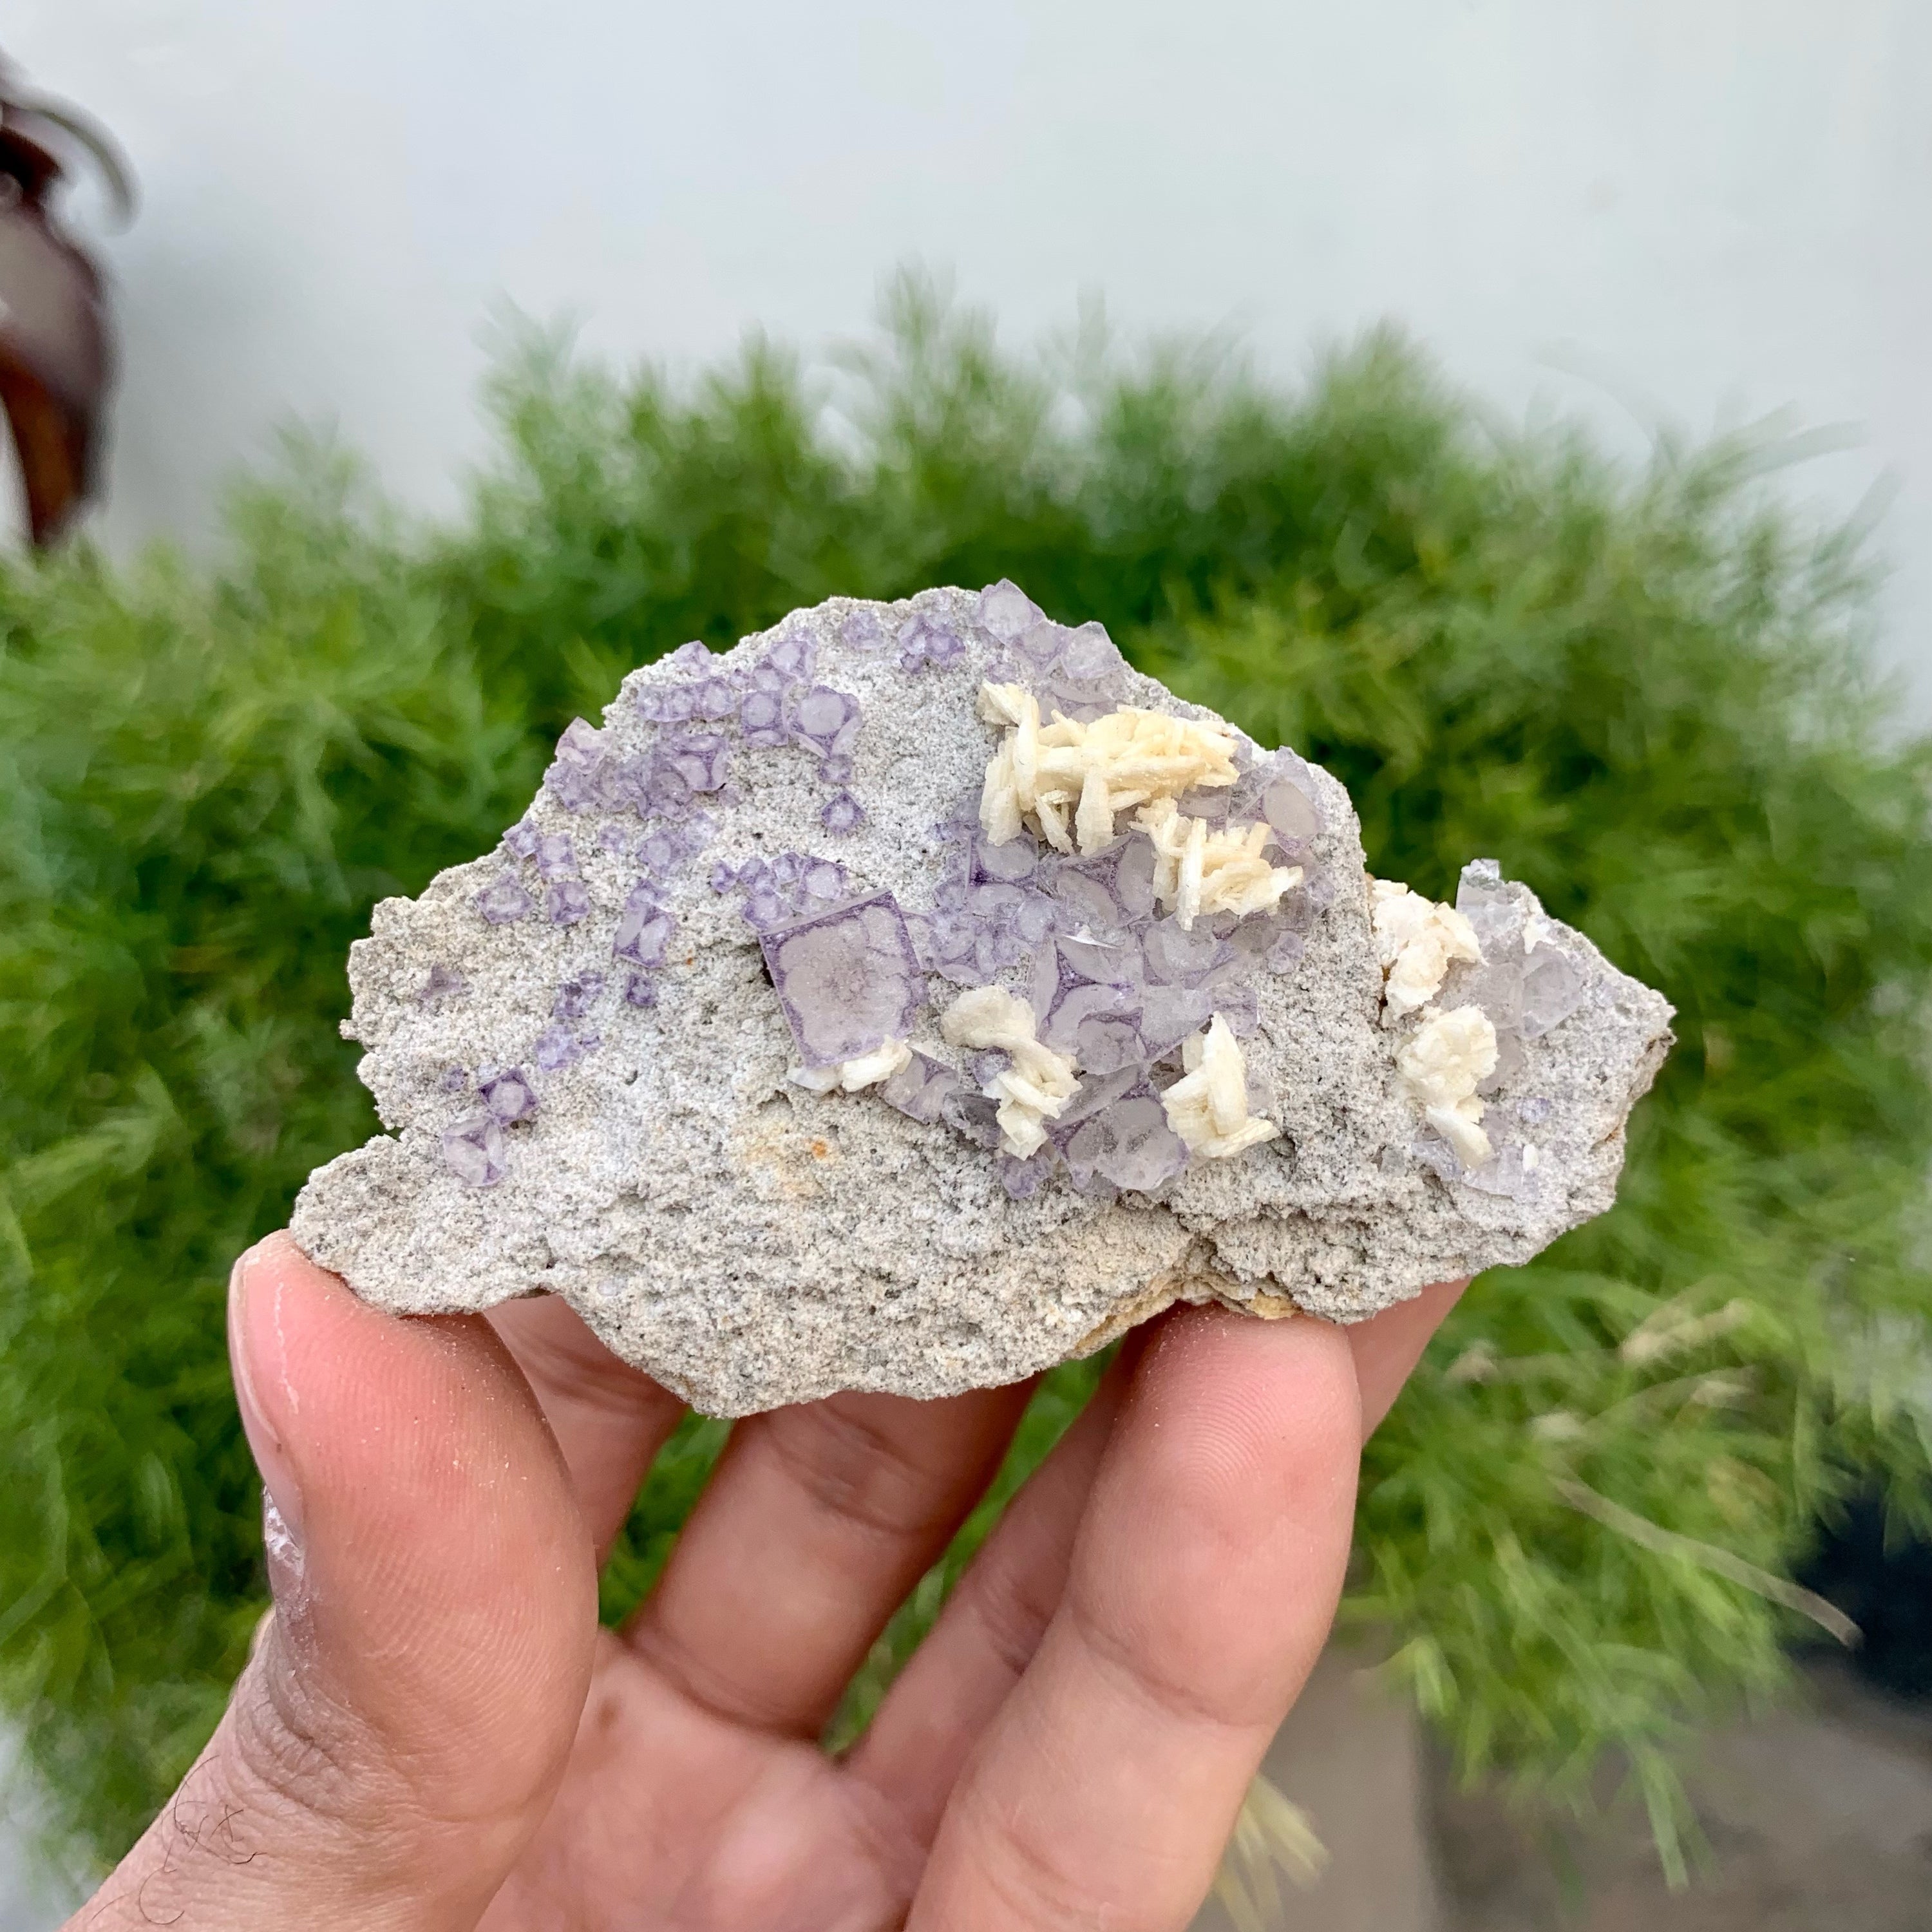 Lovely Fluorite Crystals Nicely Positioned On Matrix With Dolomite